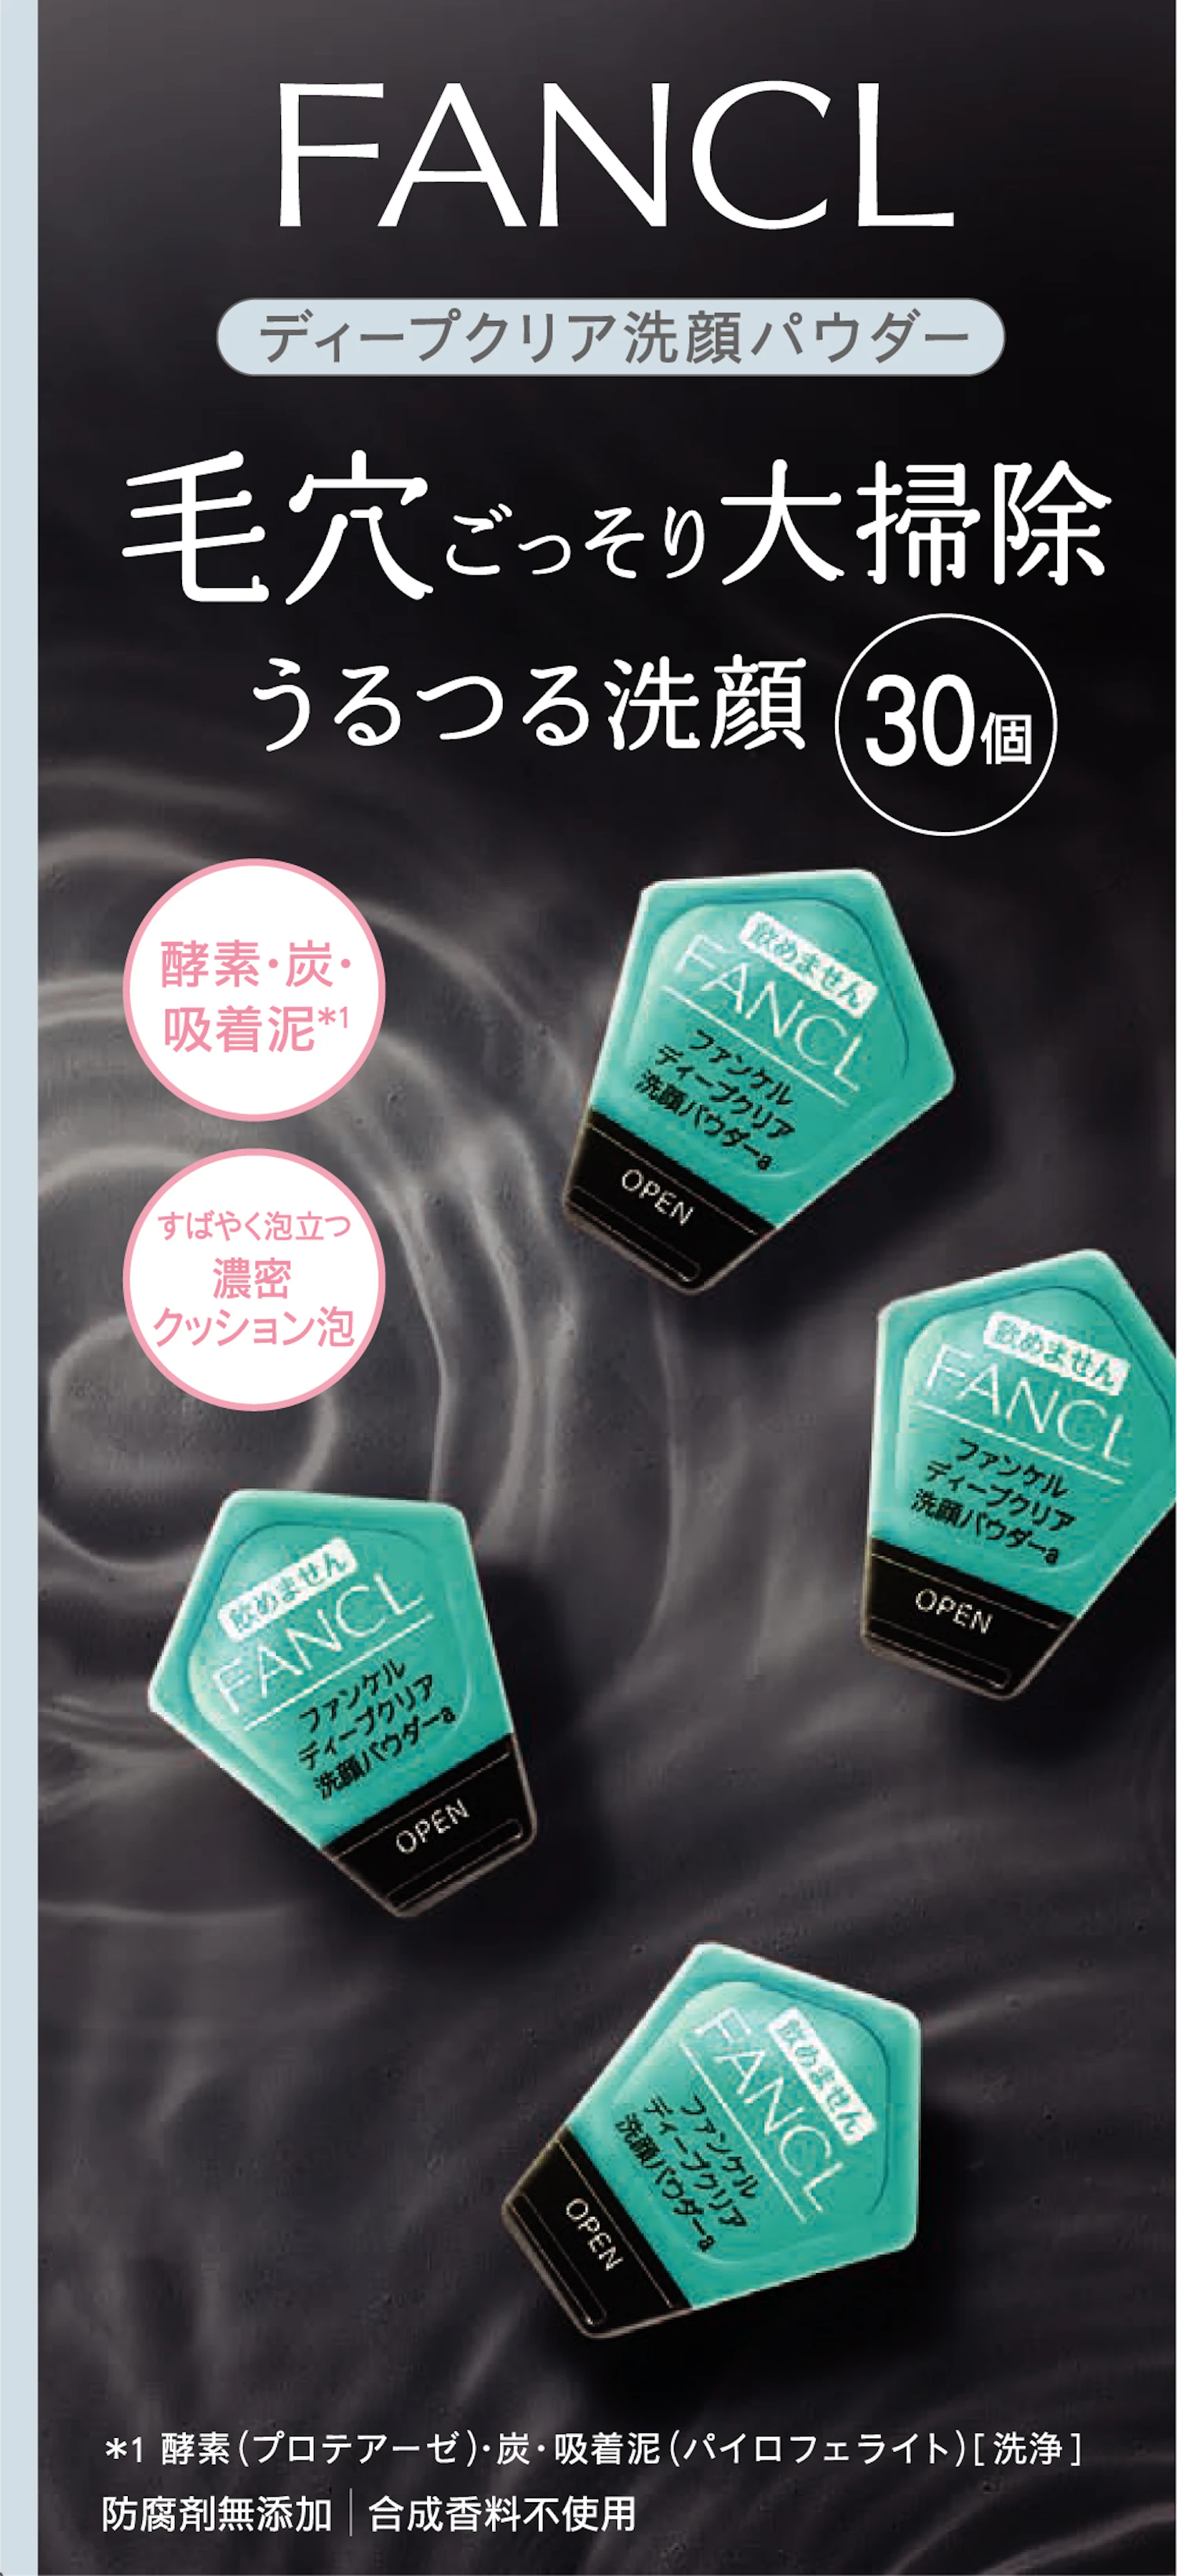 "Deep Clear Face Wash Powder" (30 pieces), 1,980 yen (tax included)